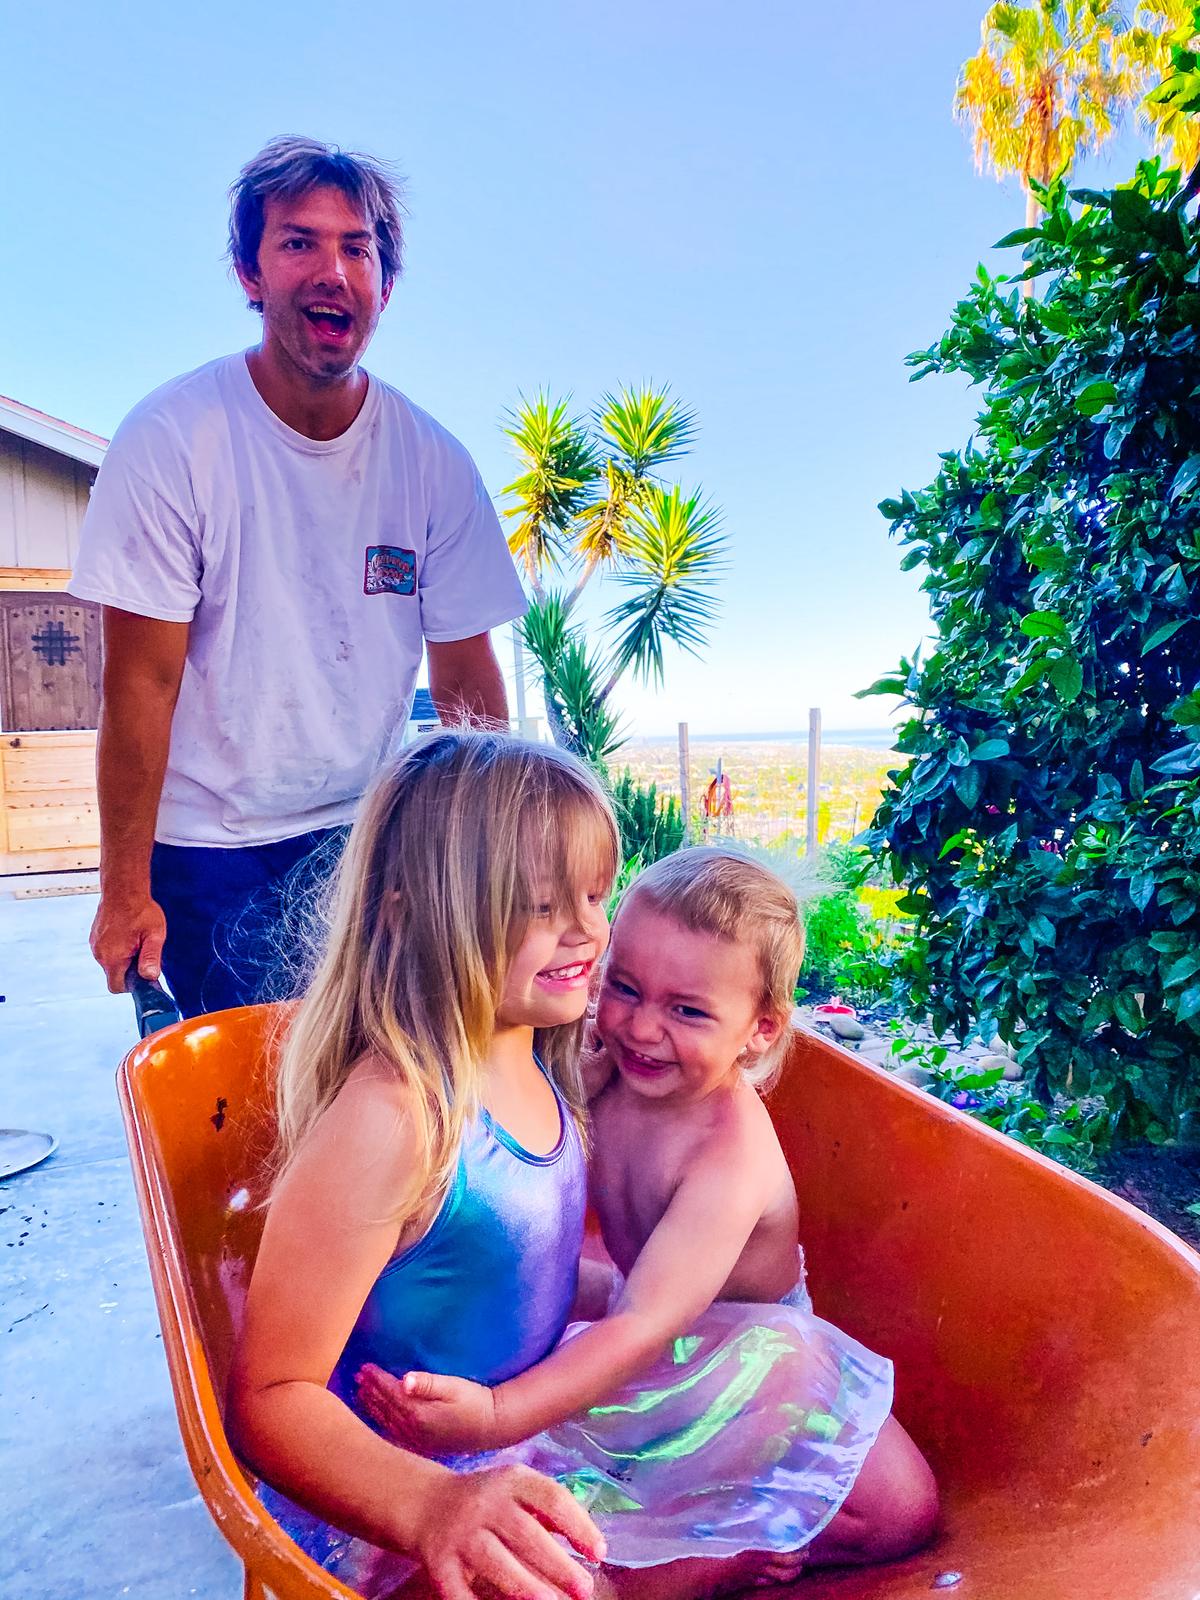 Stelios Koutroumbis working outside with his kids, Evelyn and Christopher. (Courtesy of <a href="https://www.instagram.com/mykidsaredirtyagain/">Taylor Raine</a>)